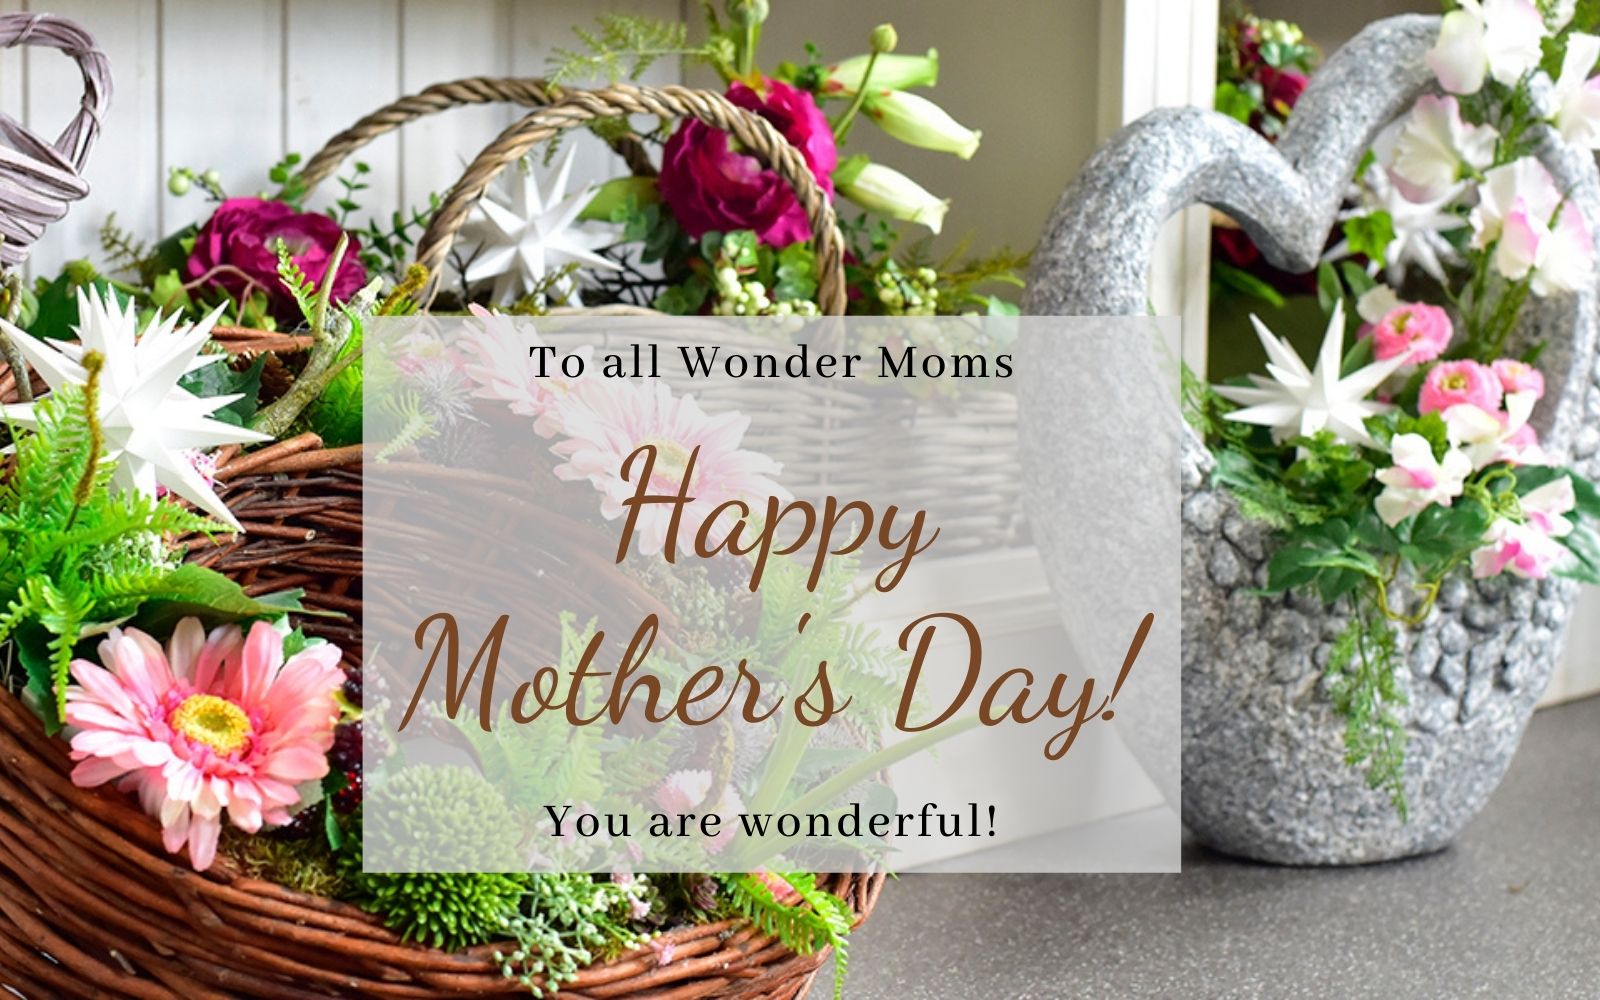 HAPPY MOTHER'S DAY TO ALL WONDER MOMS